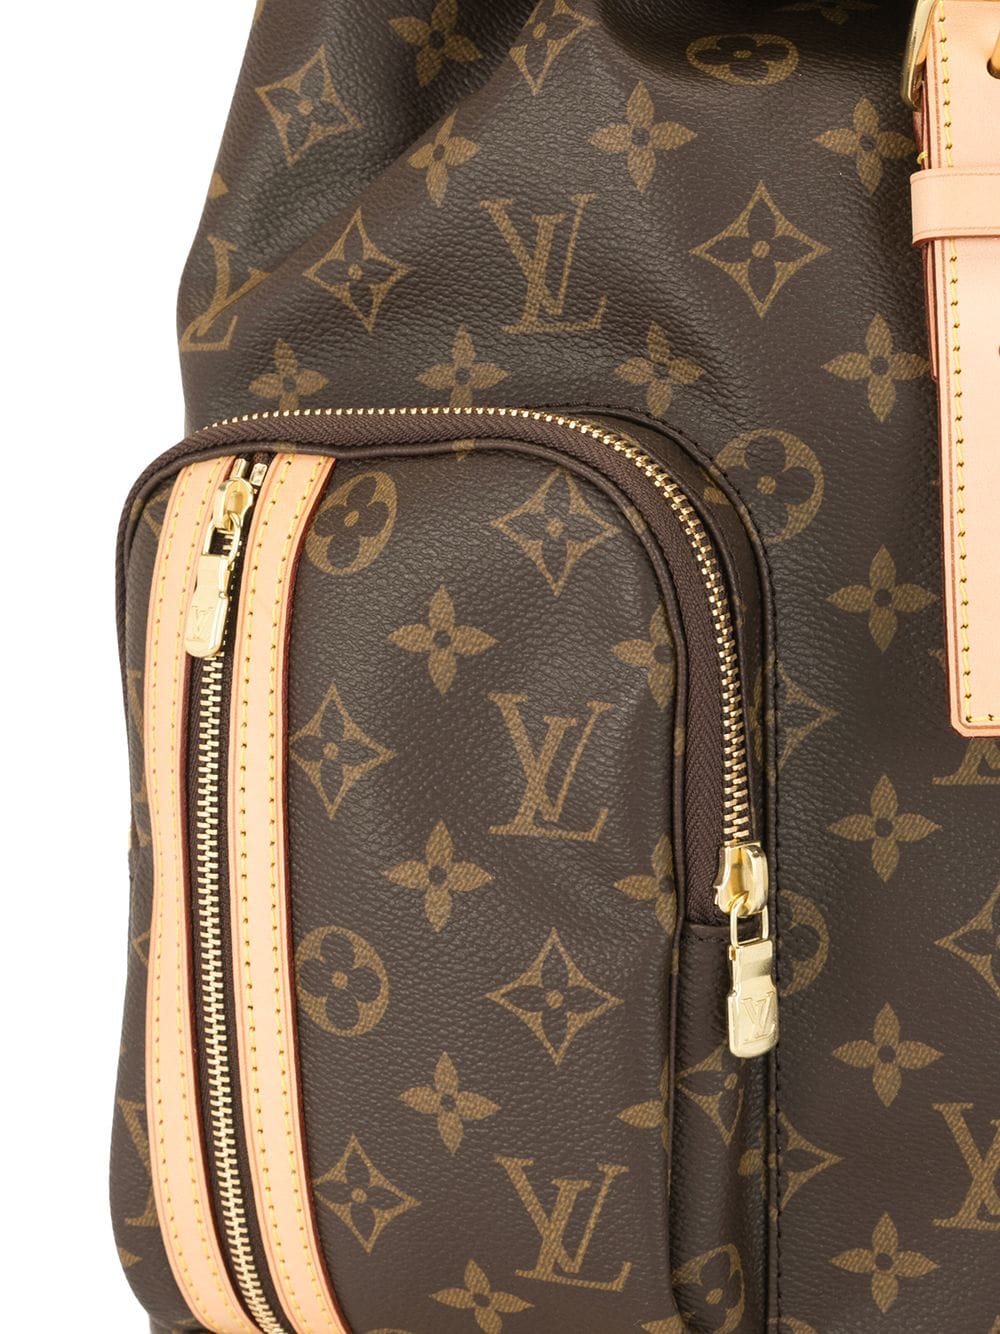 Louis Vuitton 2014 pre-owned Bosphore Backpack - Farfetch